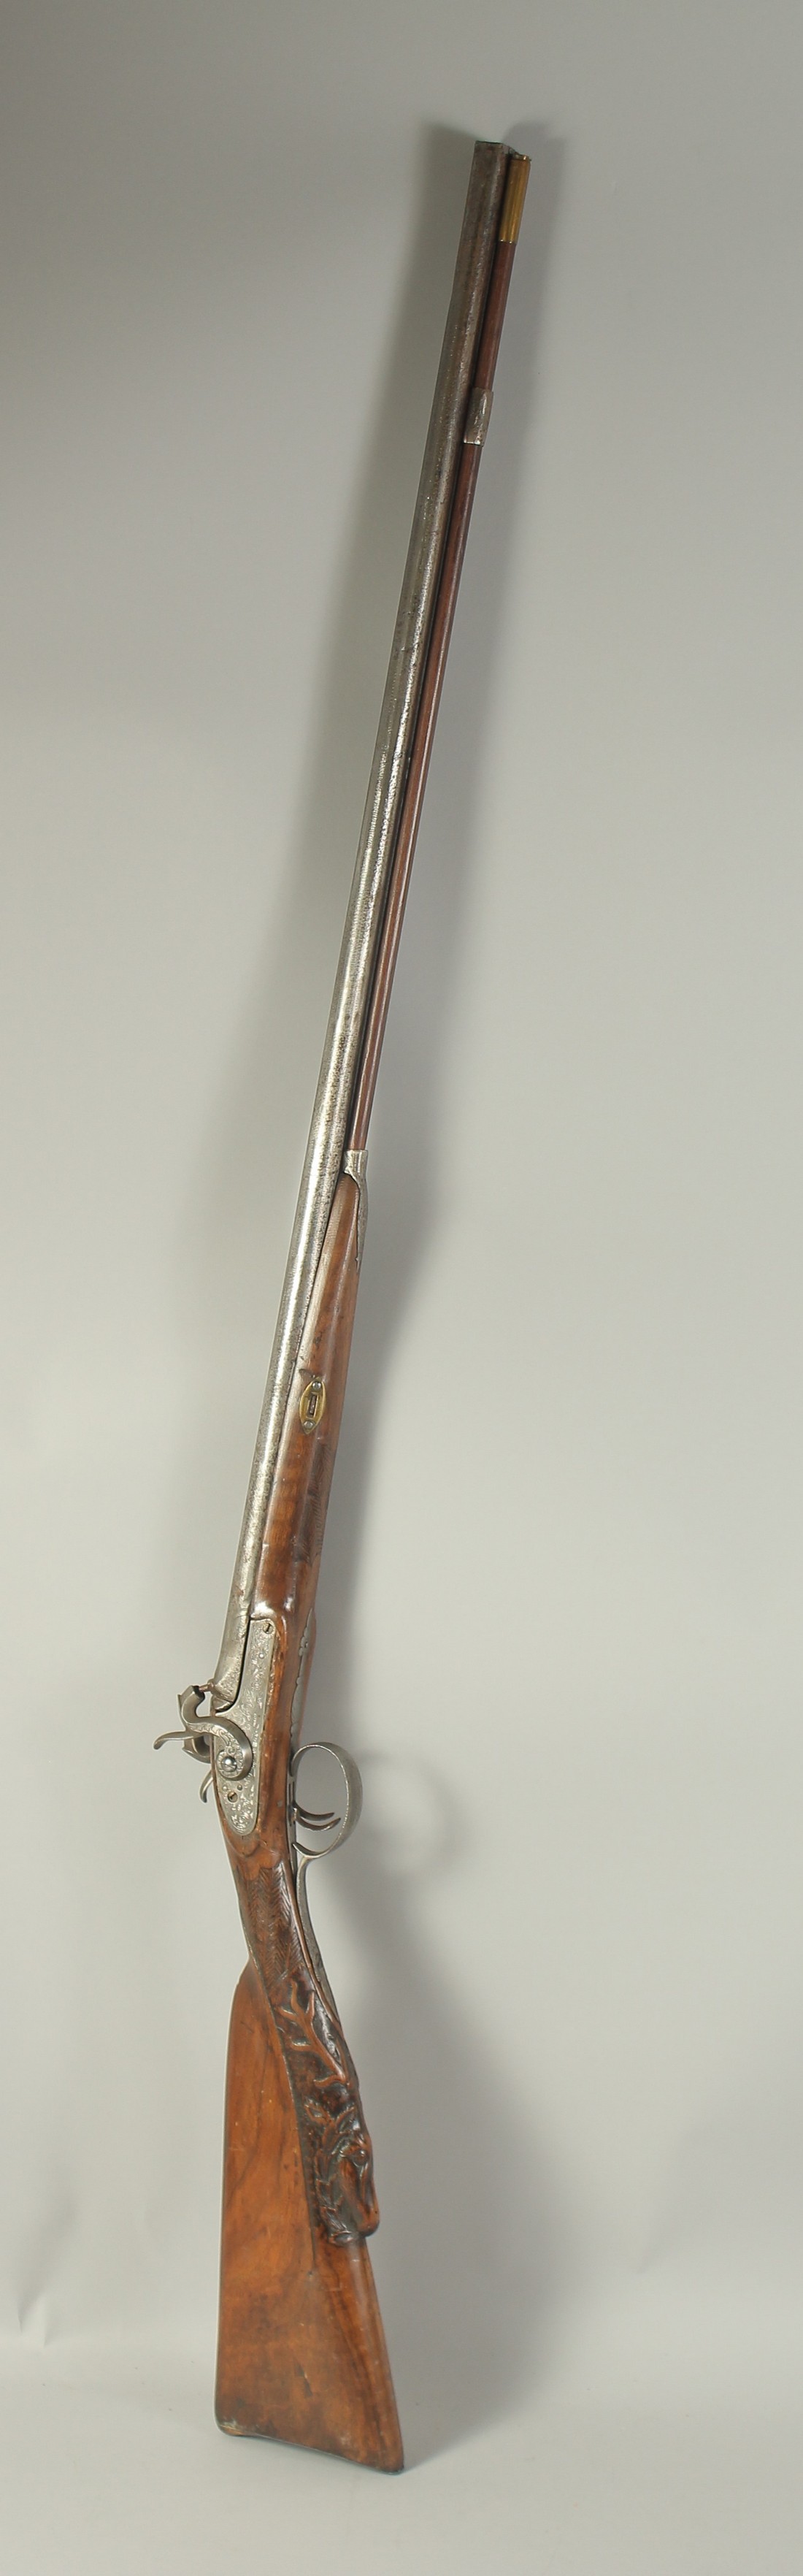 A GERMAN DOUBLE BARRELLED PERCUSSION SPORTING GUN, 18 bore with well carved stock depicting a deer.